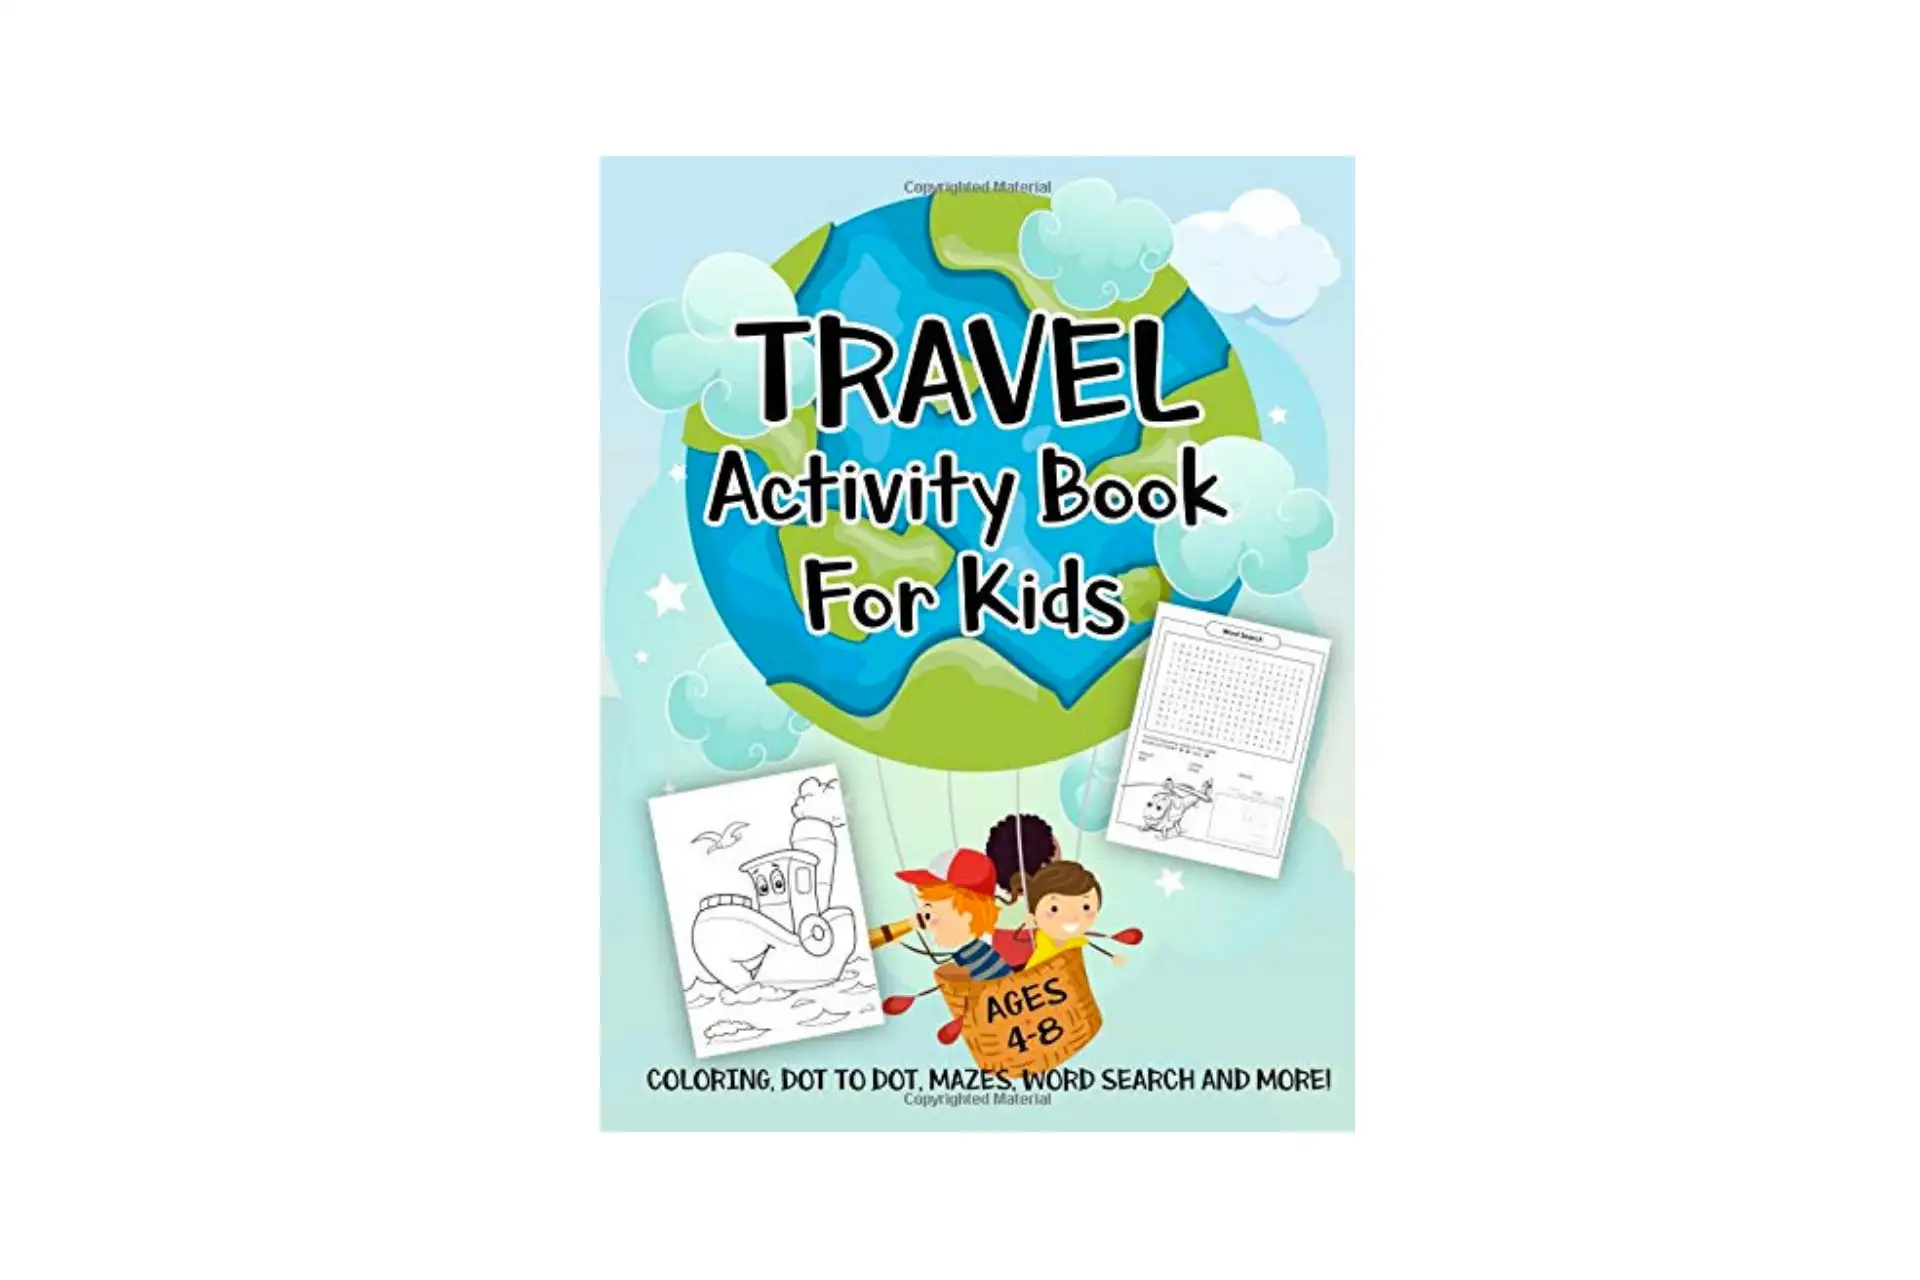 Travel Activity Book for Kids; Courtesy of Amazon